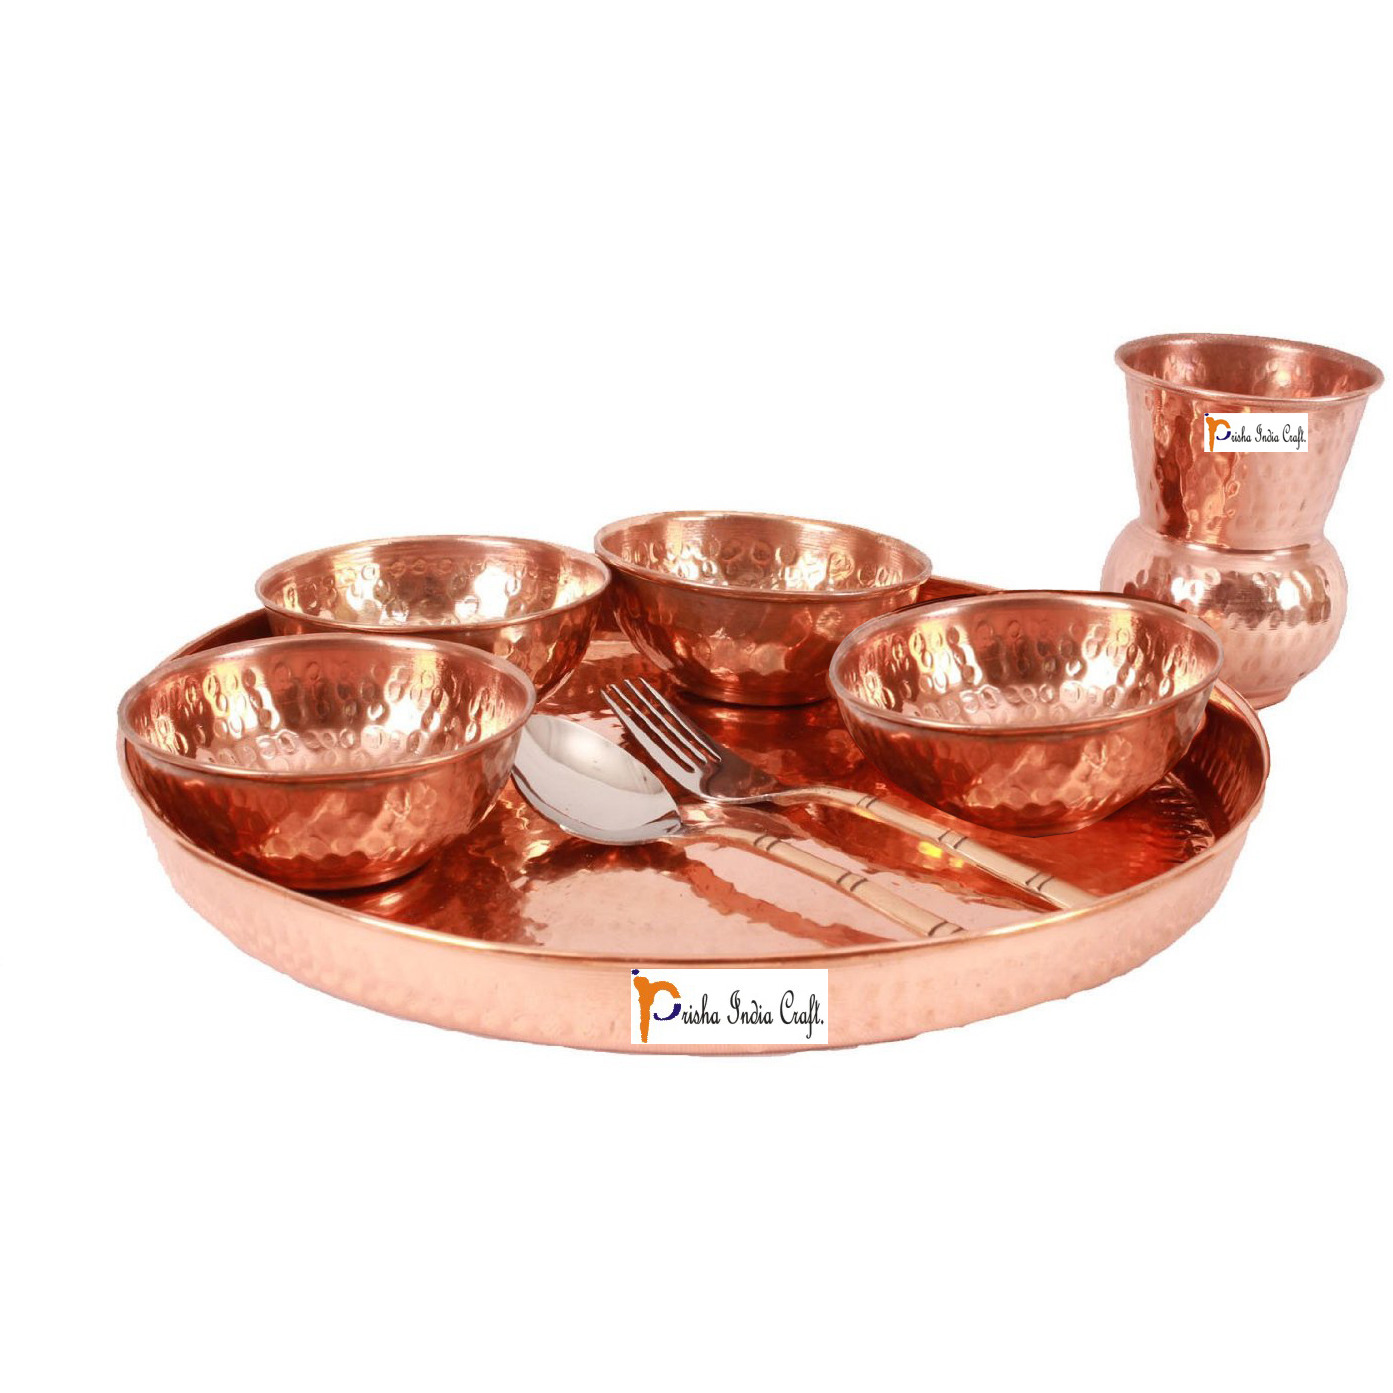 Prisha India Craft B. Set of 4 Dinnerware Traditional 100% Pure Copper Dinner Set of Thali Plate, Bowls, Glass and Spoon, Dia 12  With 1 Luxury Style Pure Copper Pitcher Jug - Christmas Gift